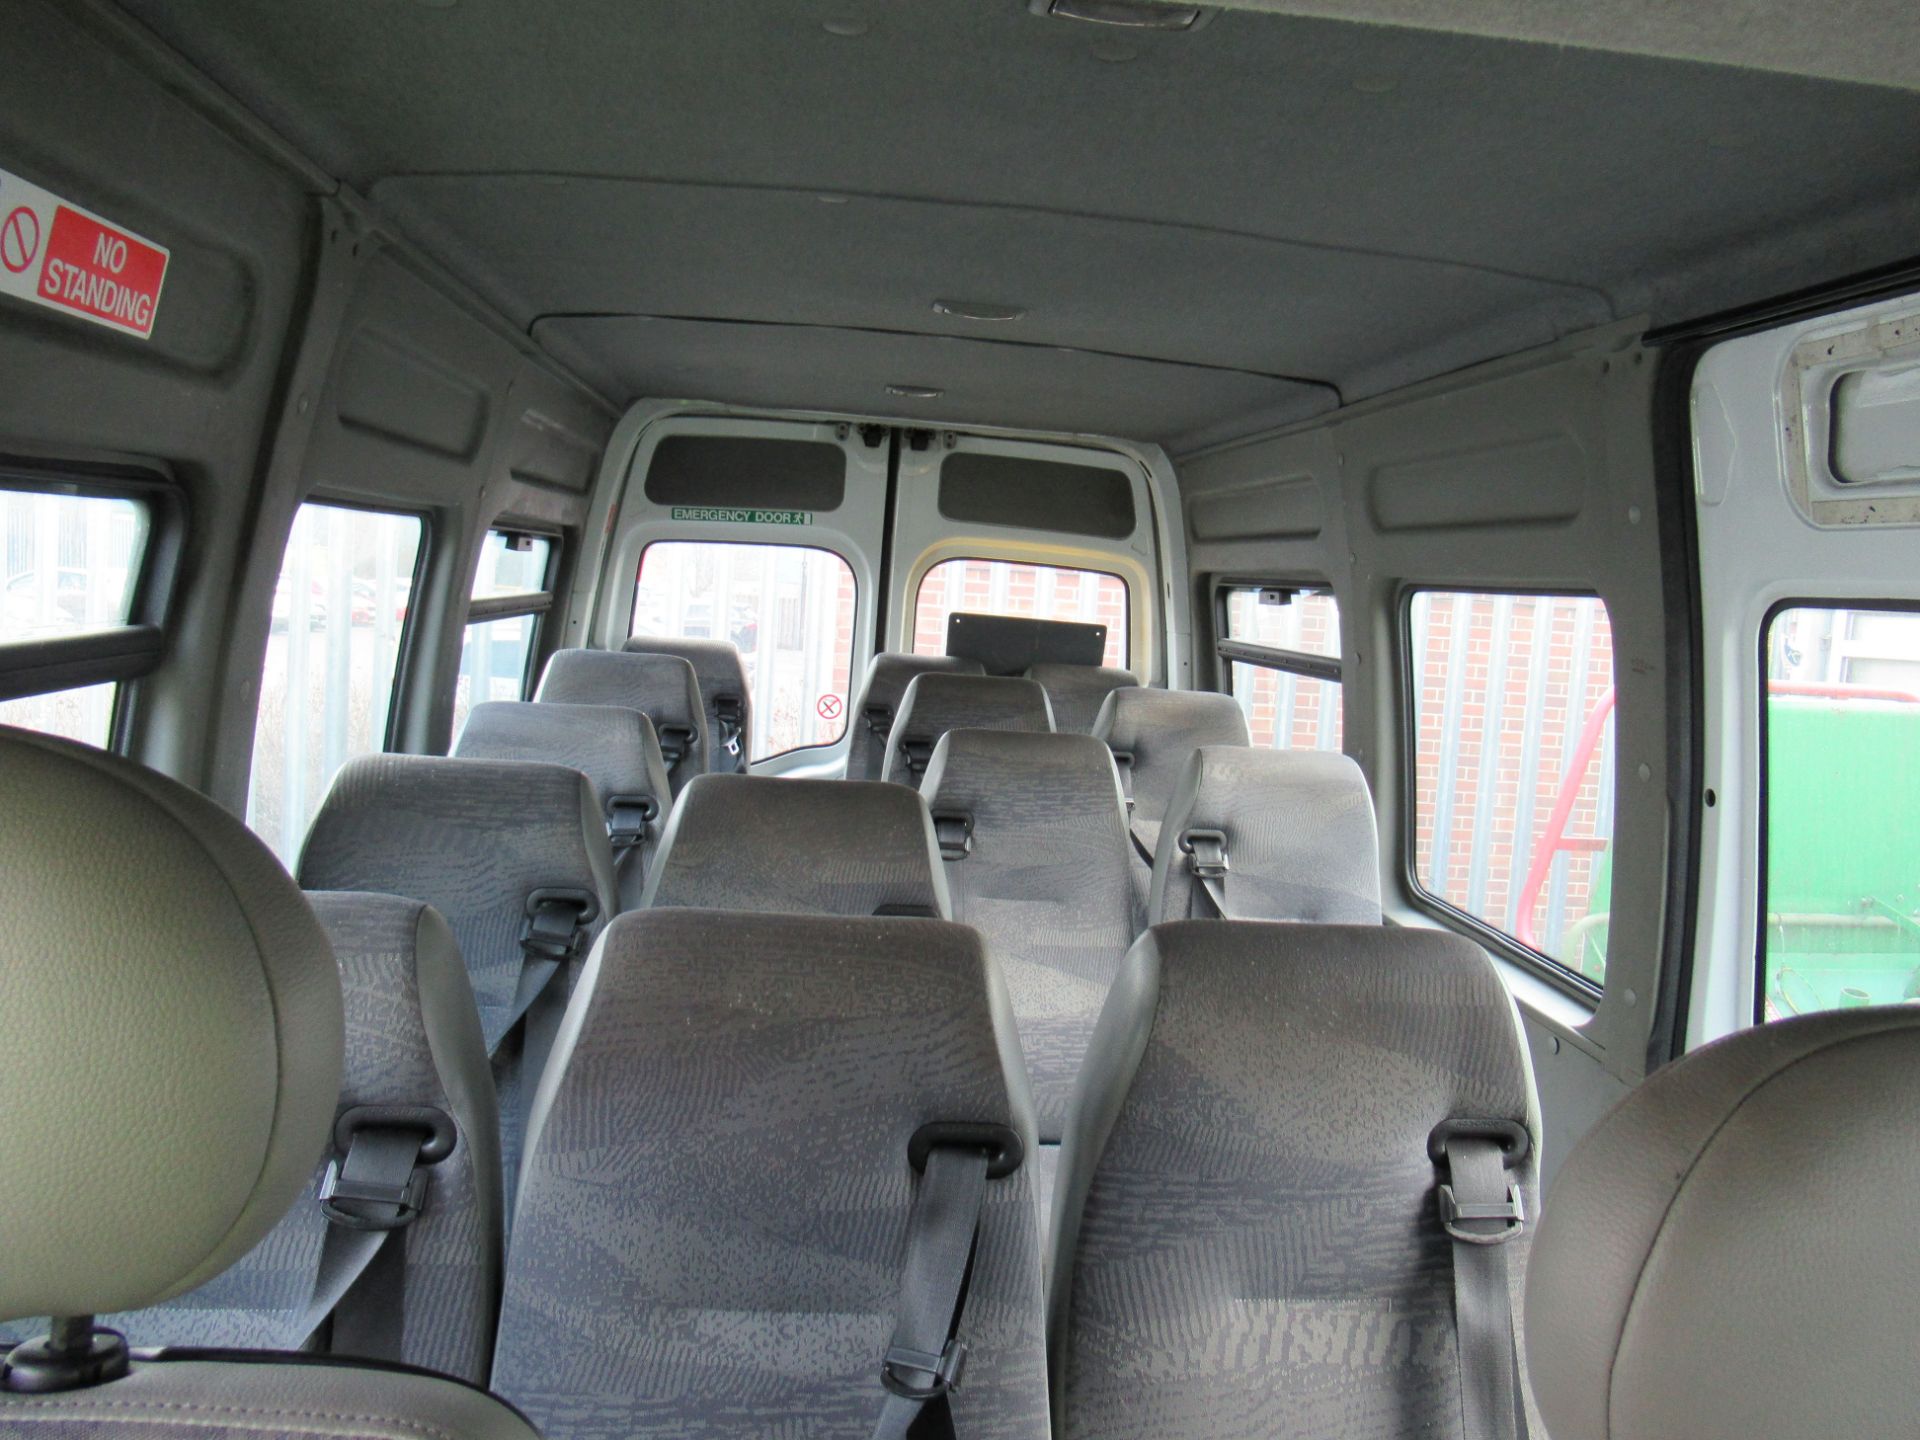 A Renault Dci 120 Mini Bus - Image 14 of 14